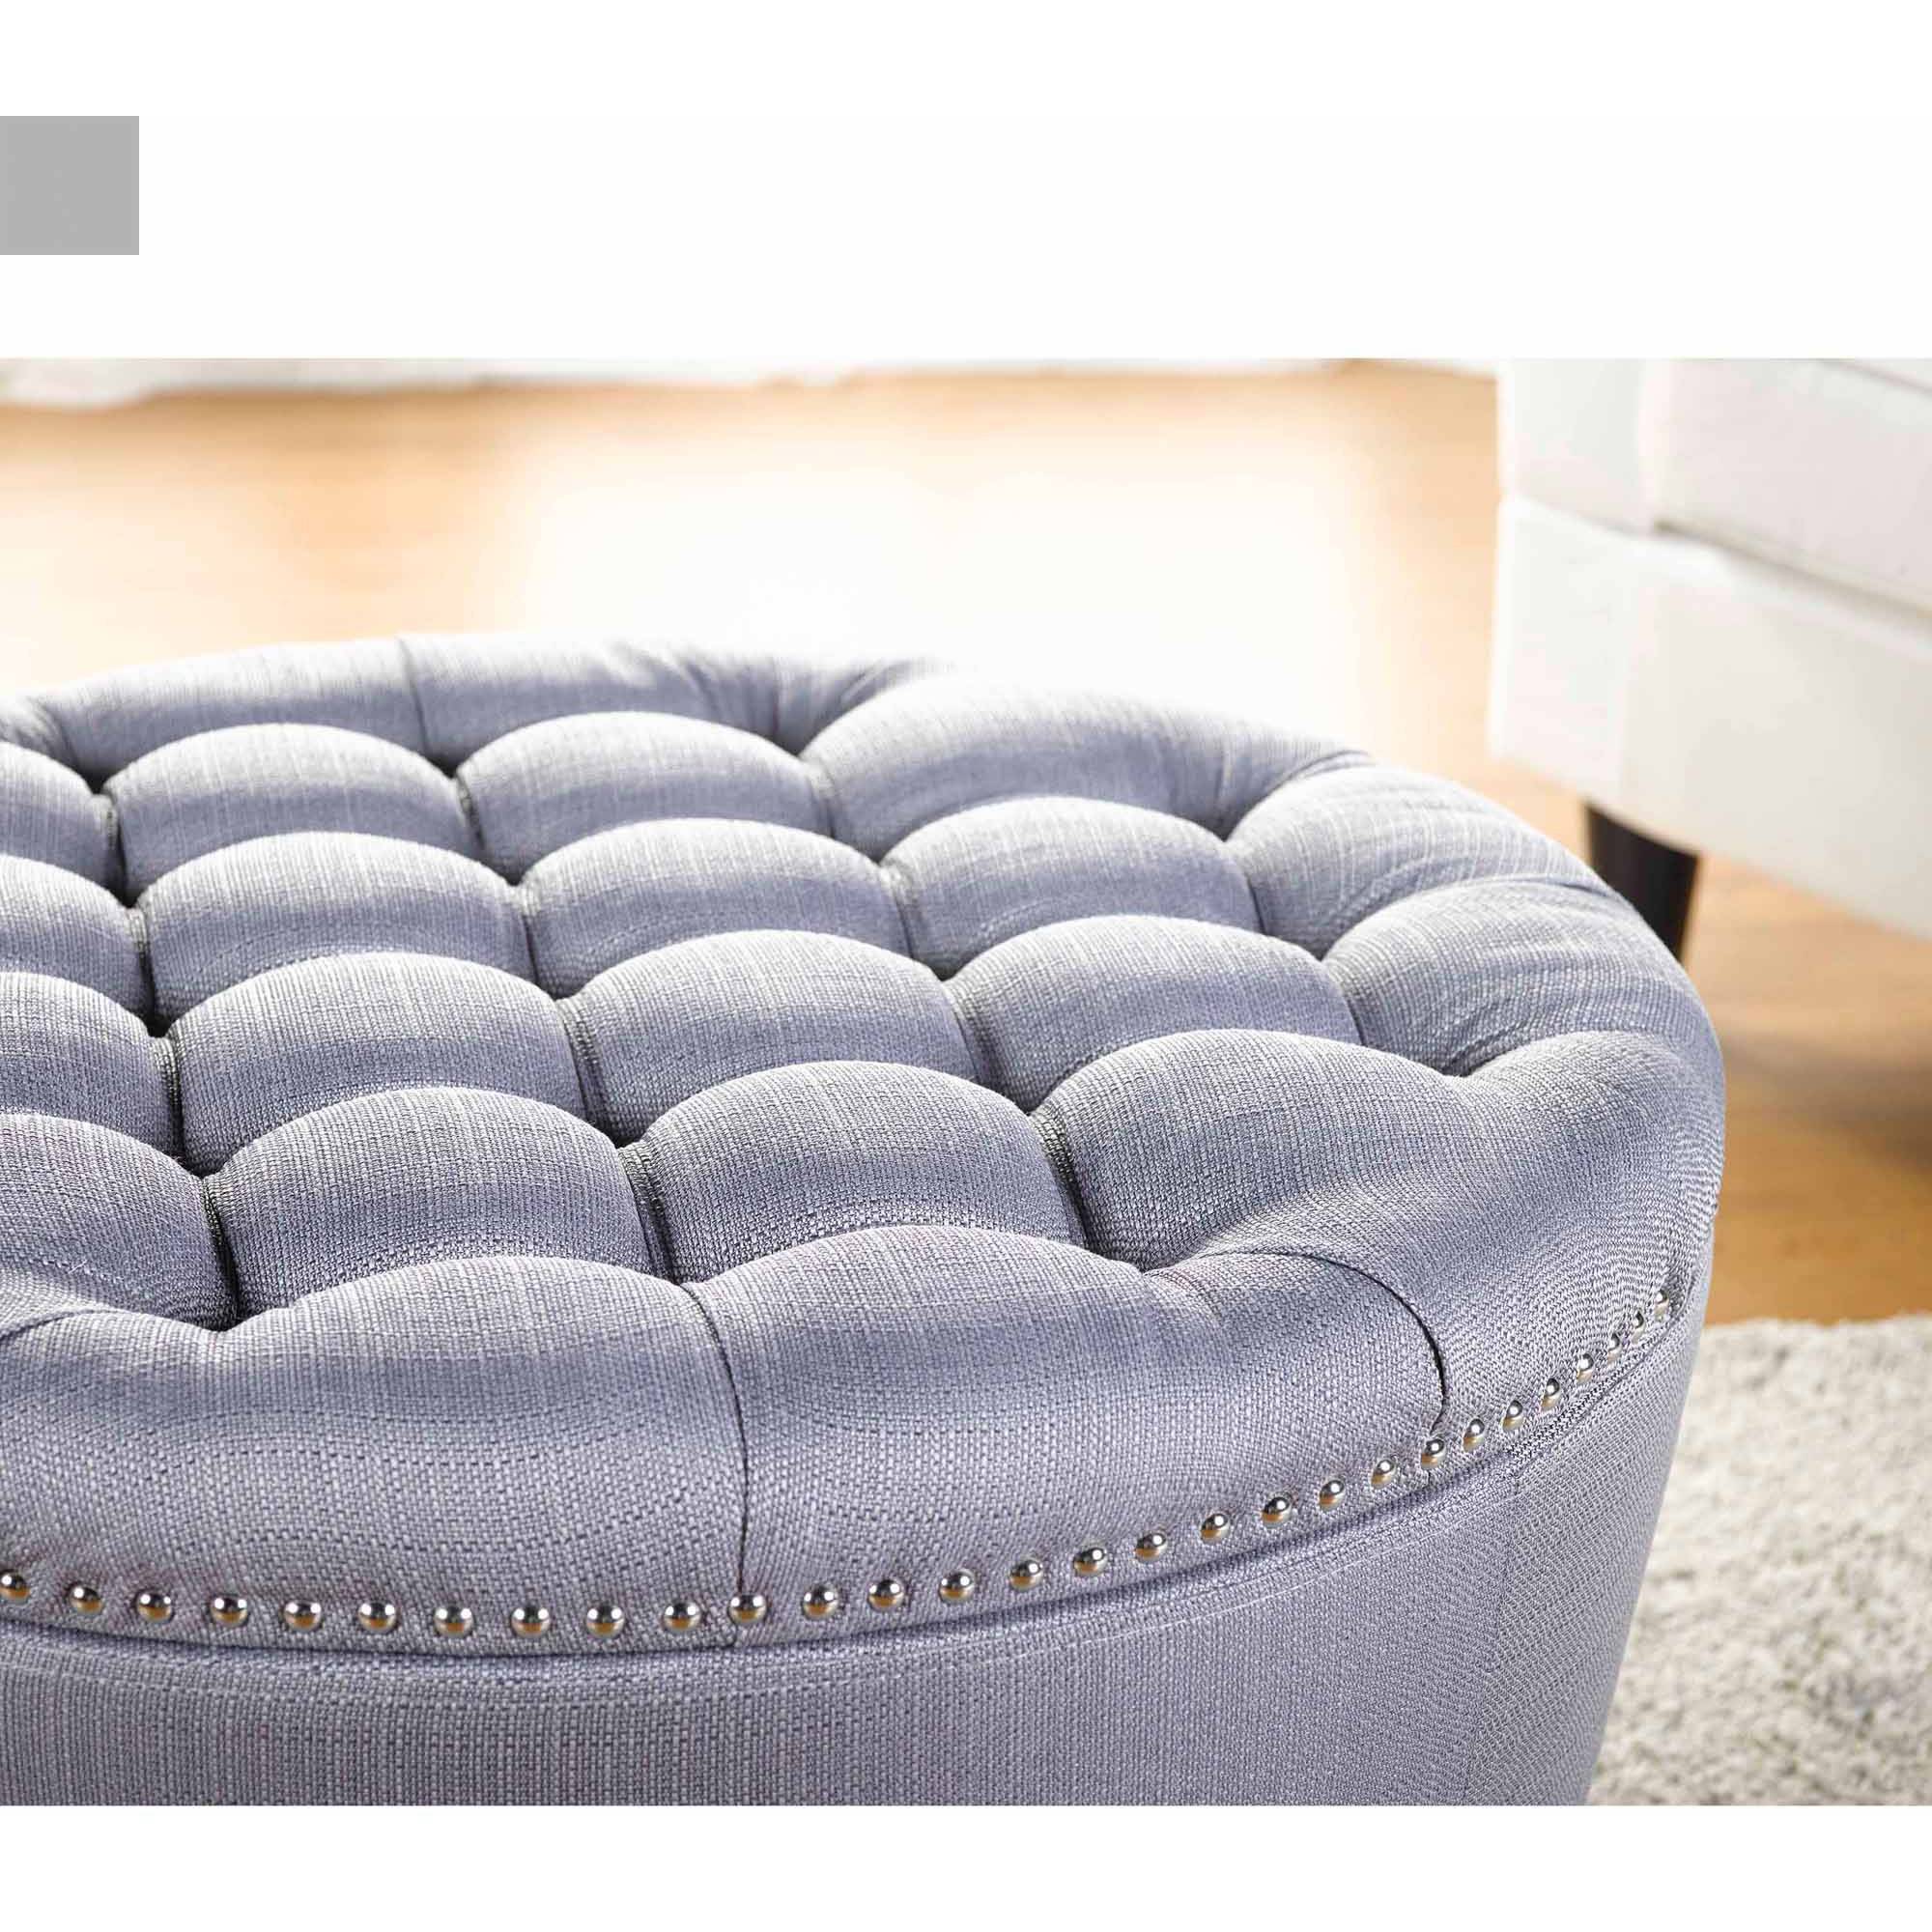 Better Homes & Gardens Round Tufted Storage Ottoman with Nailheads, Gray - image 4 of 4